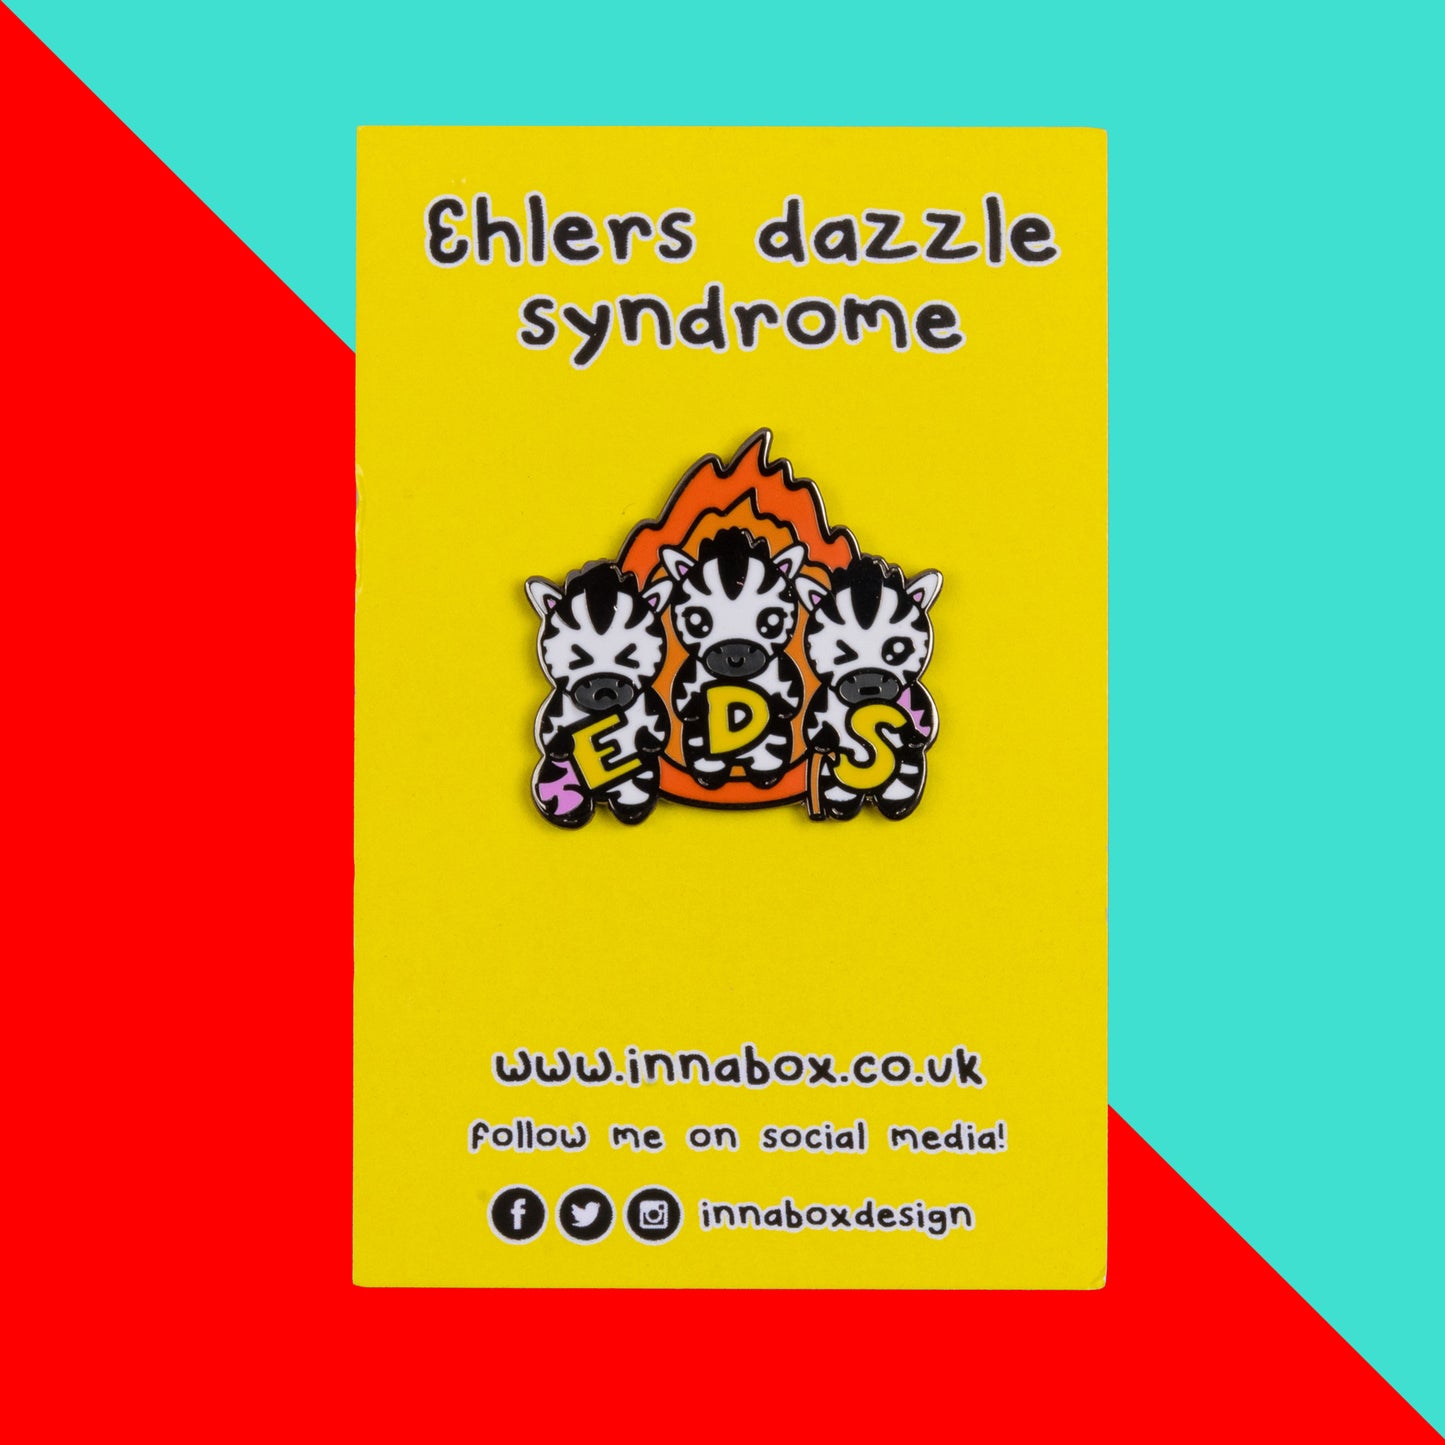 The Ehlers Dazzle Syndrome EDS Enamel Pin 2.0 - Ehlers-Danlos Syndrome on yellow backing card with black text above reading 'ehlers dazzle syndrome' and below reading the innabox website and social media handles on a red and blue background. A pin of three zebras in front of an orange flame holding up yellow letters spelling out EDS, the first zebra has a swollen pink leg, the next is smiling and the third has a swollen pink arm and a walking stick. Raising awareness for Ehlers-Danlos Syndrome.